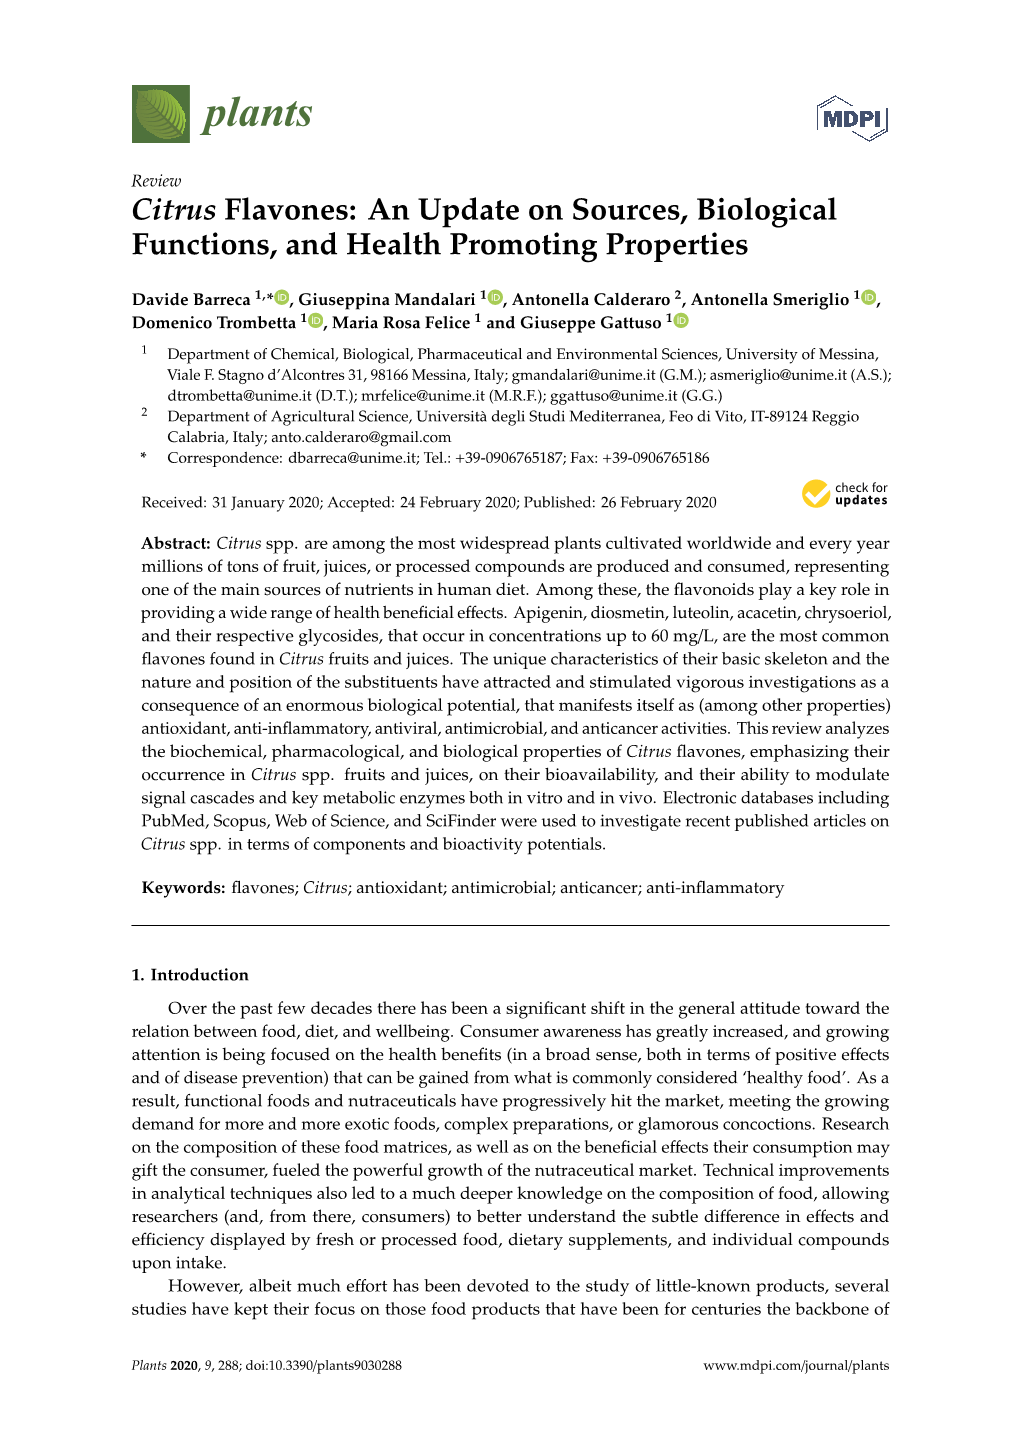 Citrus Flavones: an Update on Sources, Biological Functions, and Health Promoting Properties